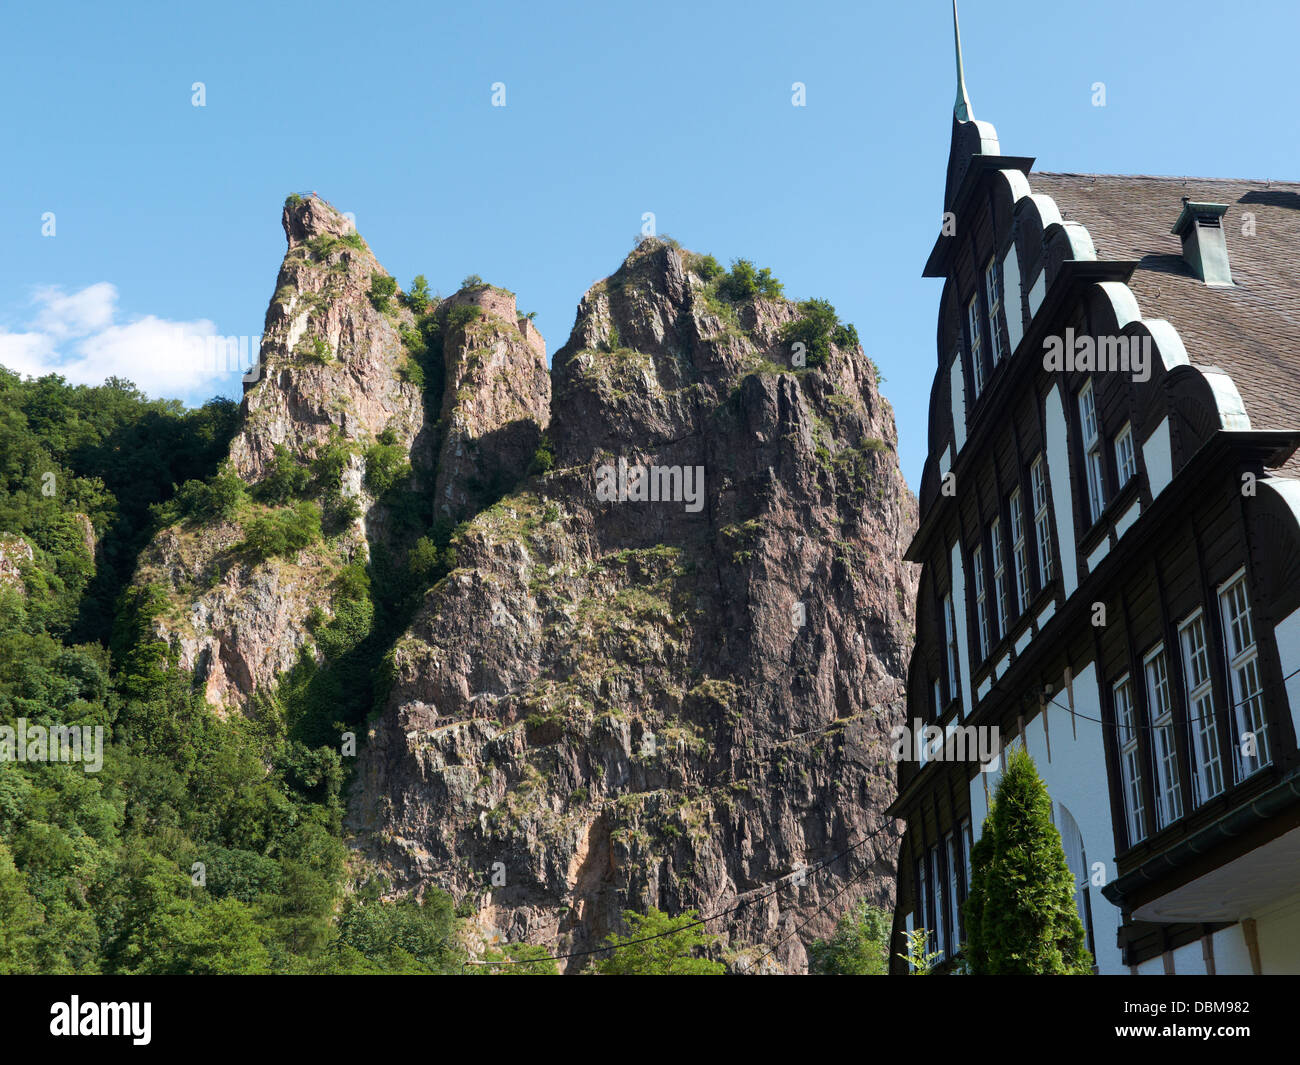 View to the rock massif Rotenfels and the gable of the Kurhaus, Bad Münster am Stein-Ebernburg, Rheinland-Palatinate,Germany Stock Photo